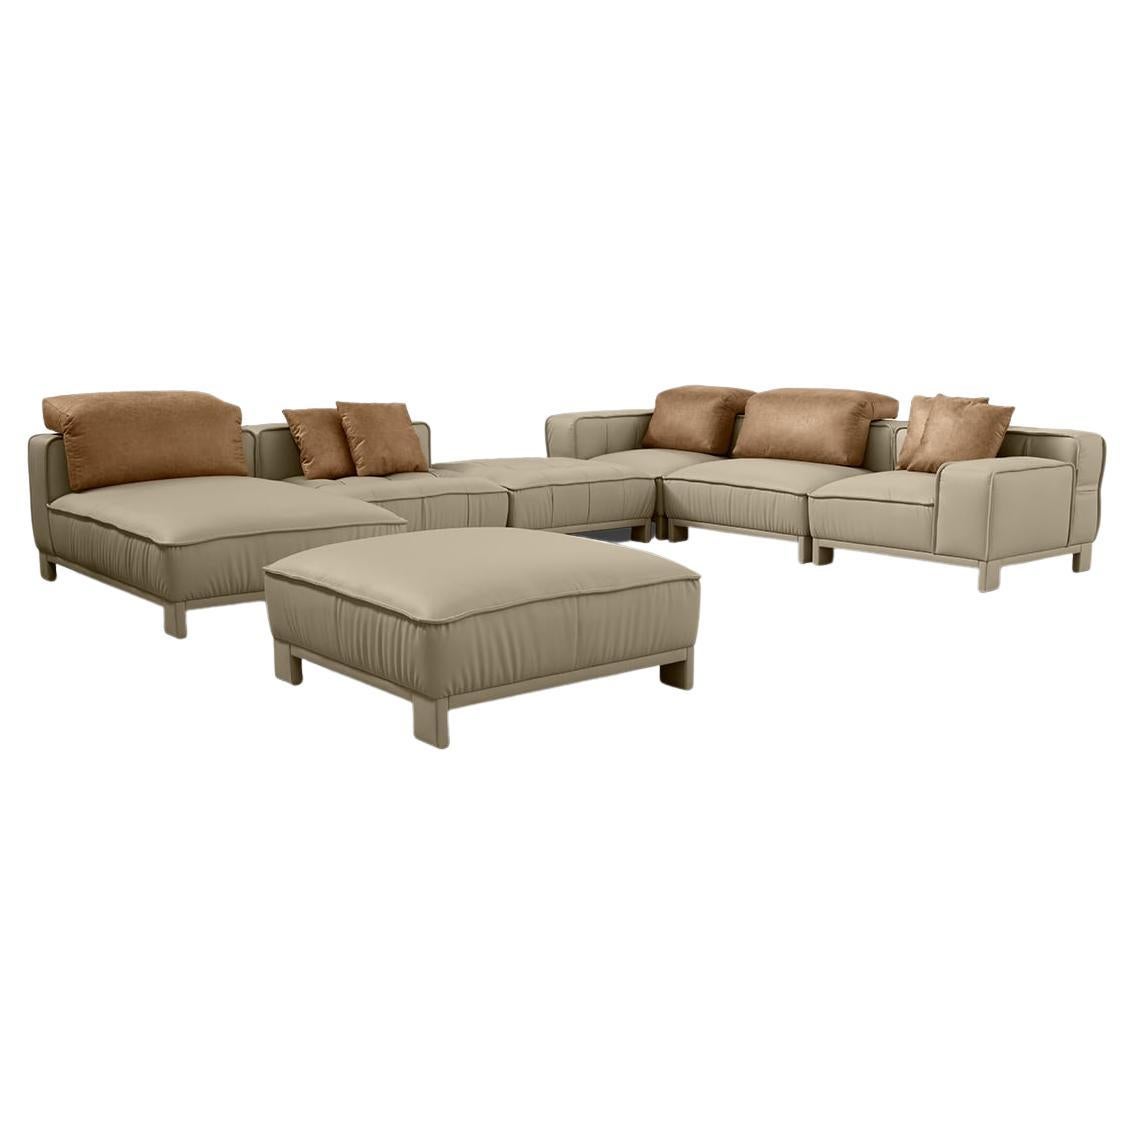 Contemporary Modern Excelsa Modular Sofa by Caffe Latte For Sale